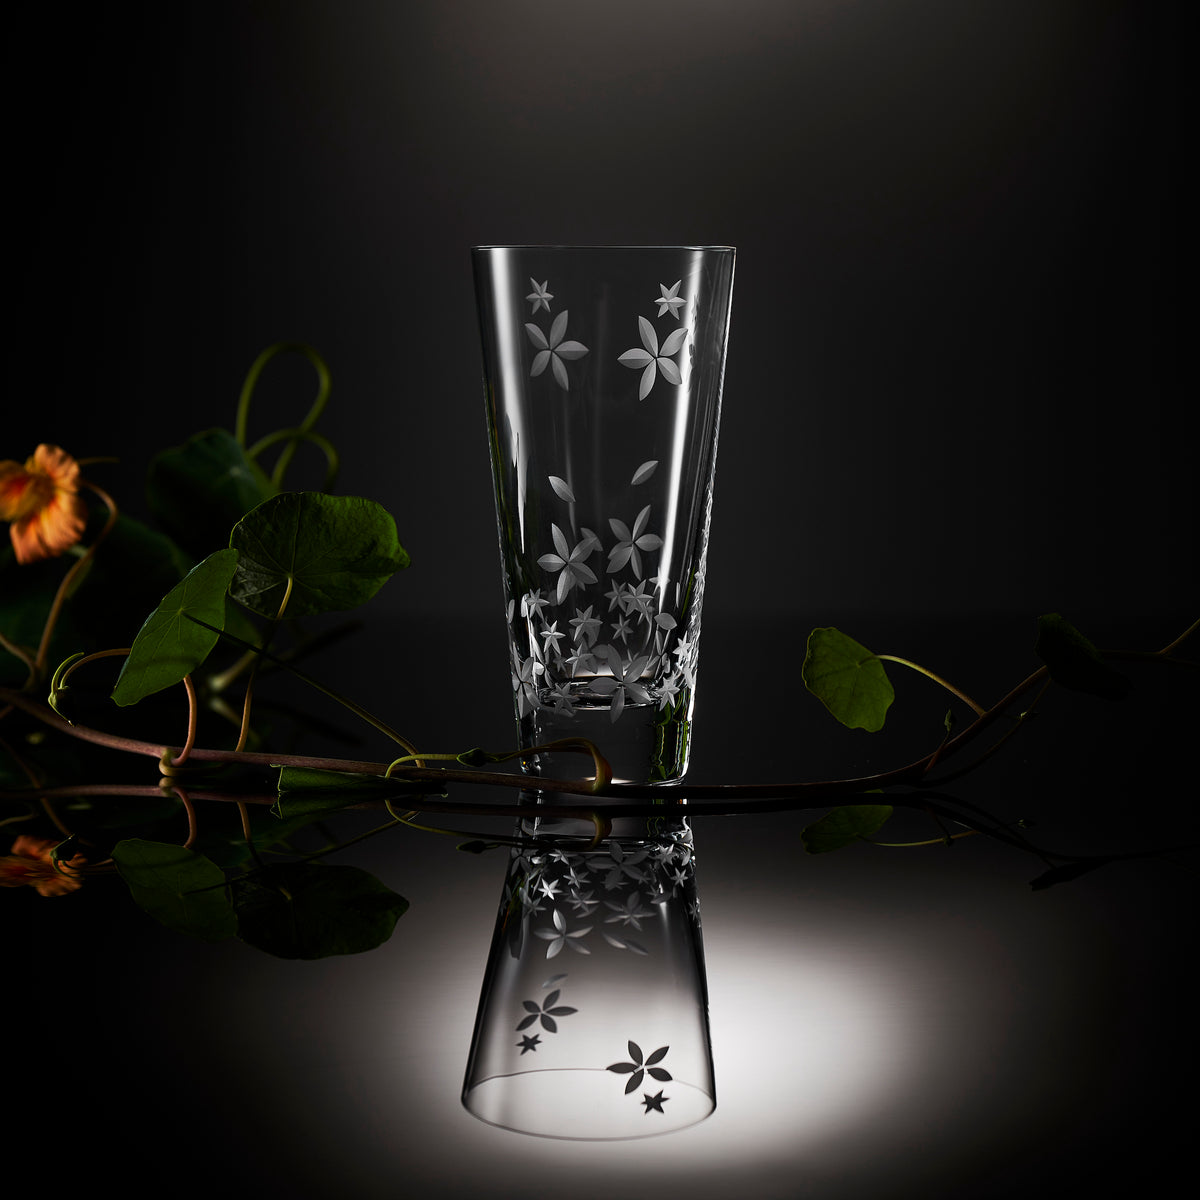 Chatham Bloom highball glass, etched floral pattern on lead-free crystal by Caskata.